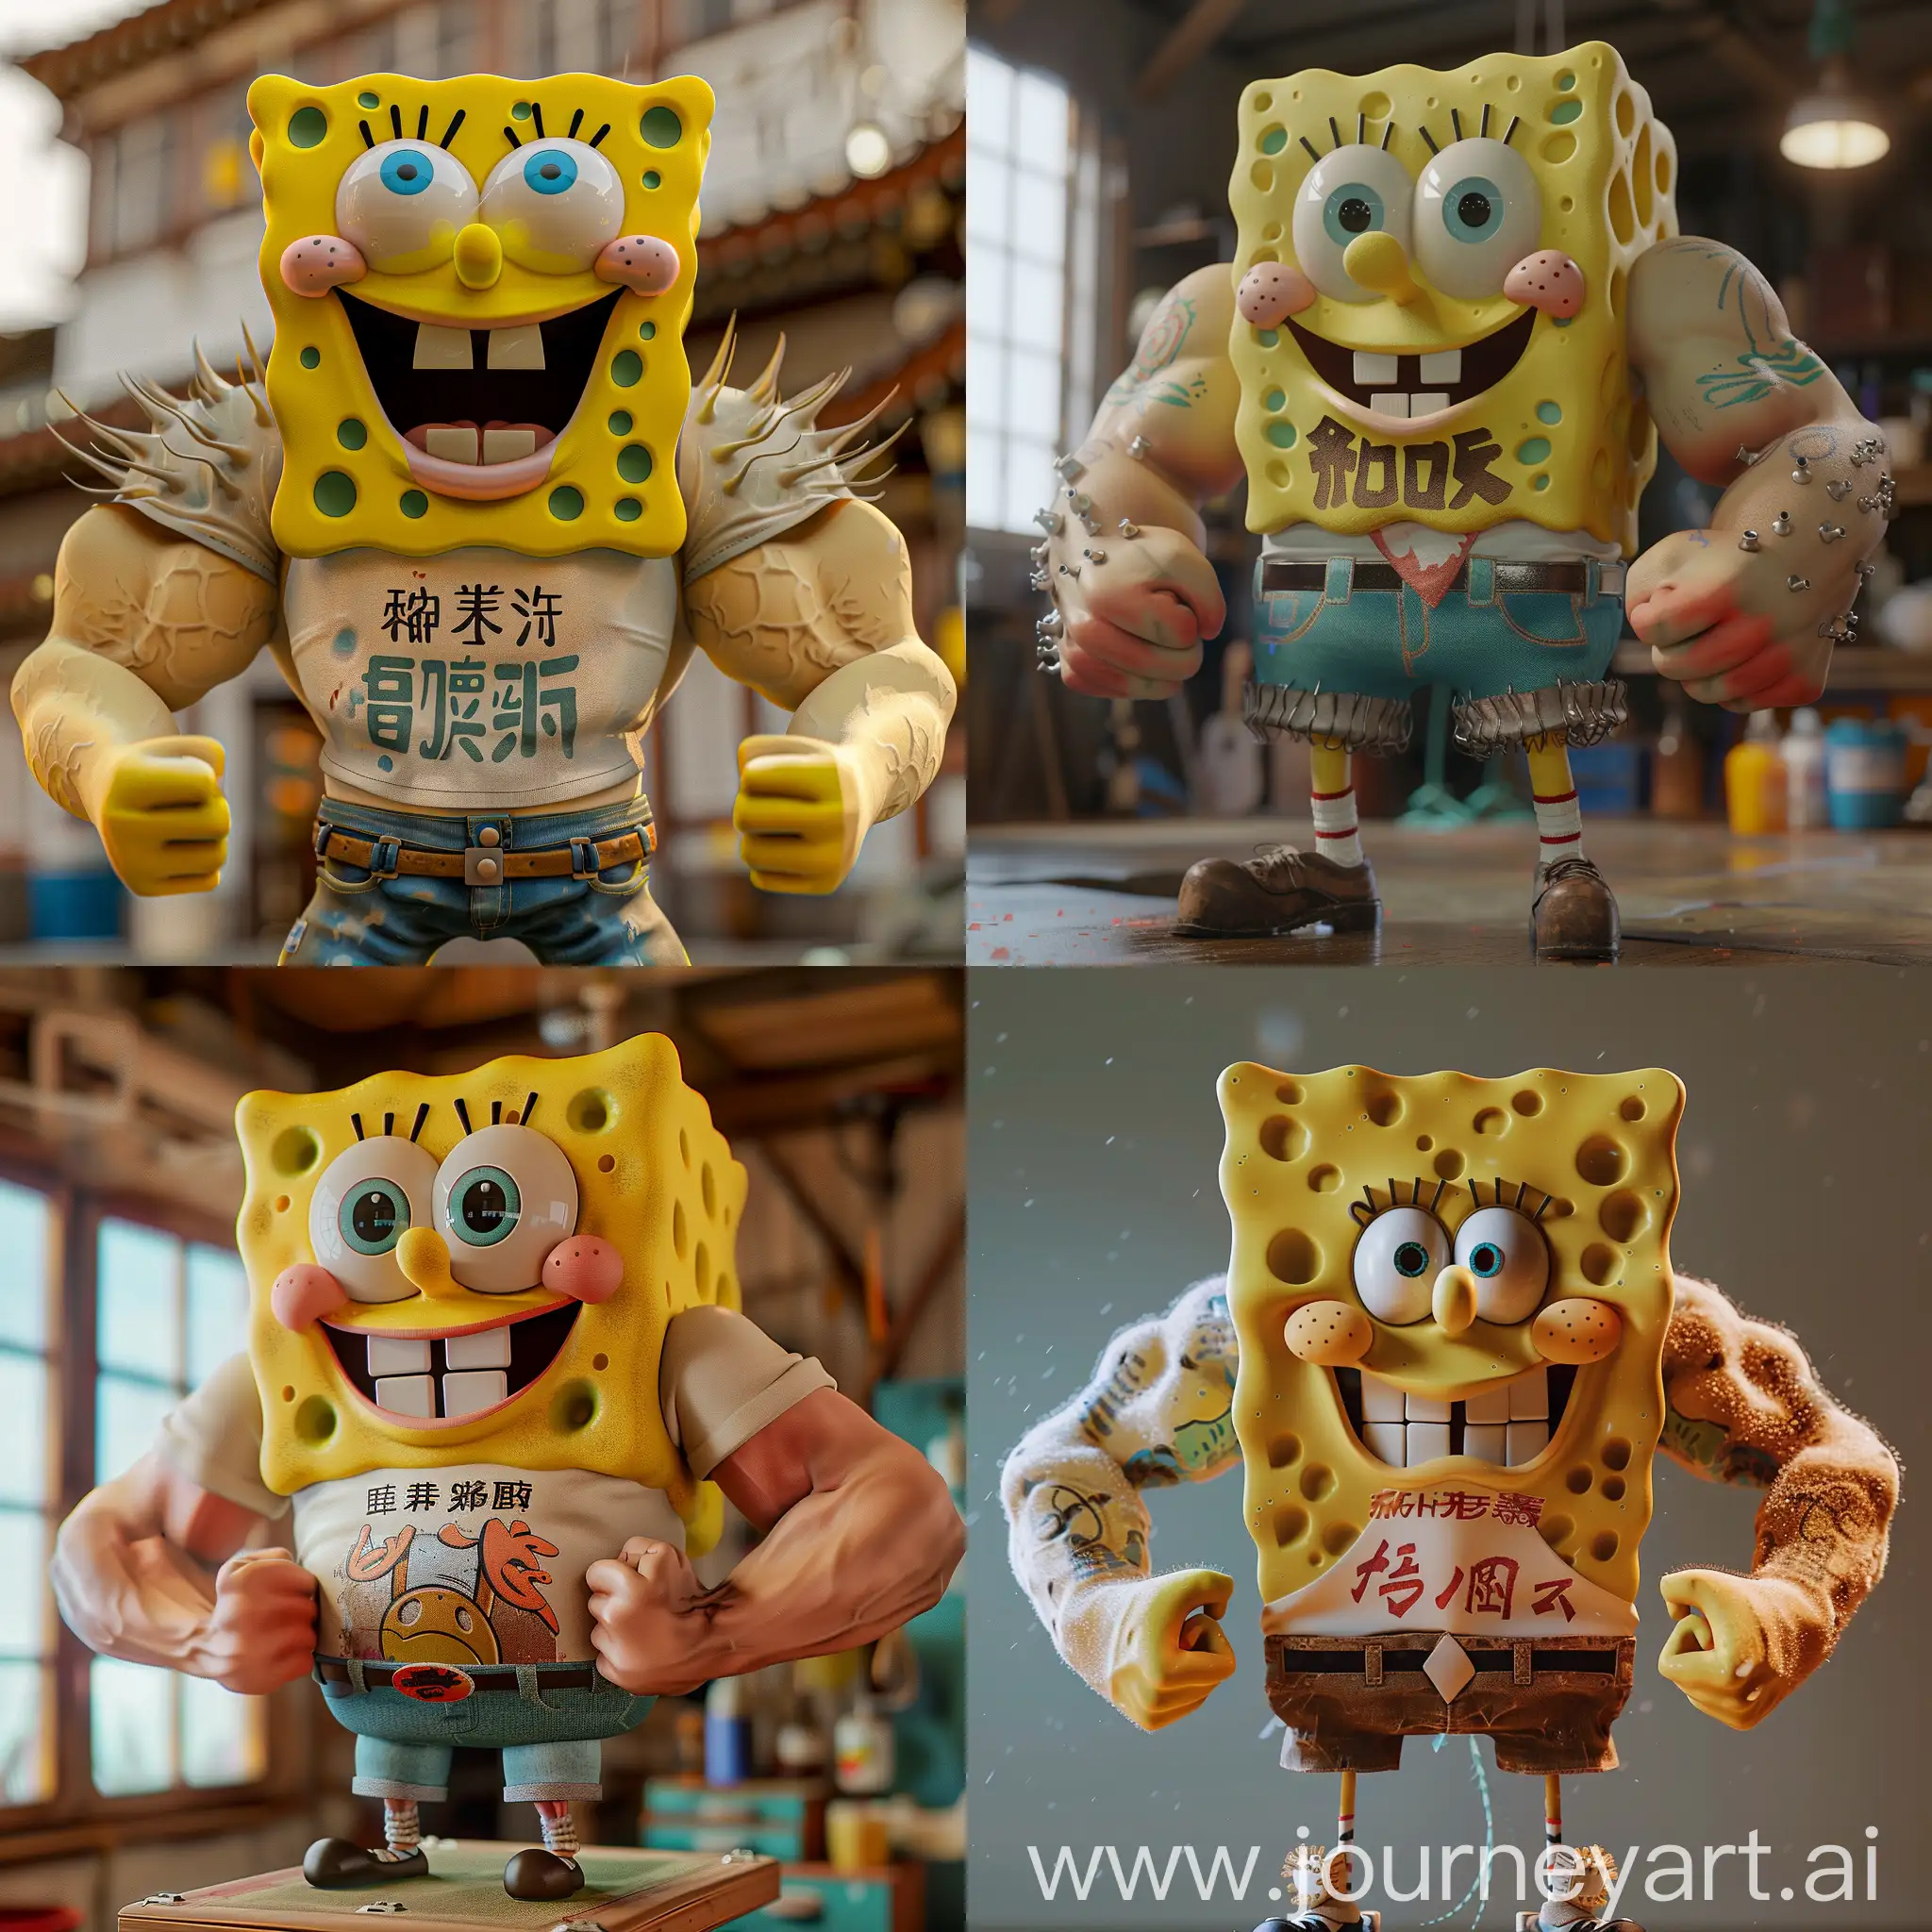 Realistic Sponge Bob have big muscles and tshort with text "СВО" Super realistic Unreal engine 5 hyper detailed